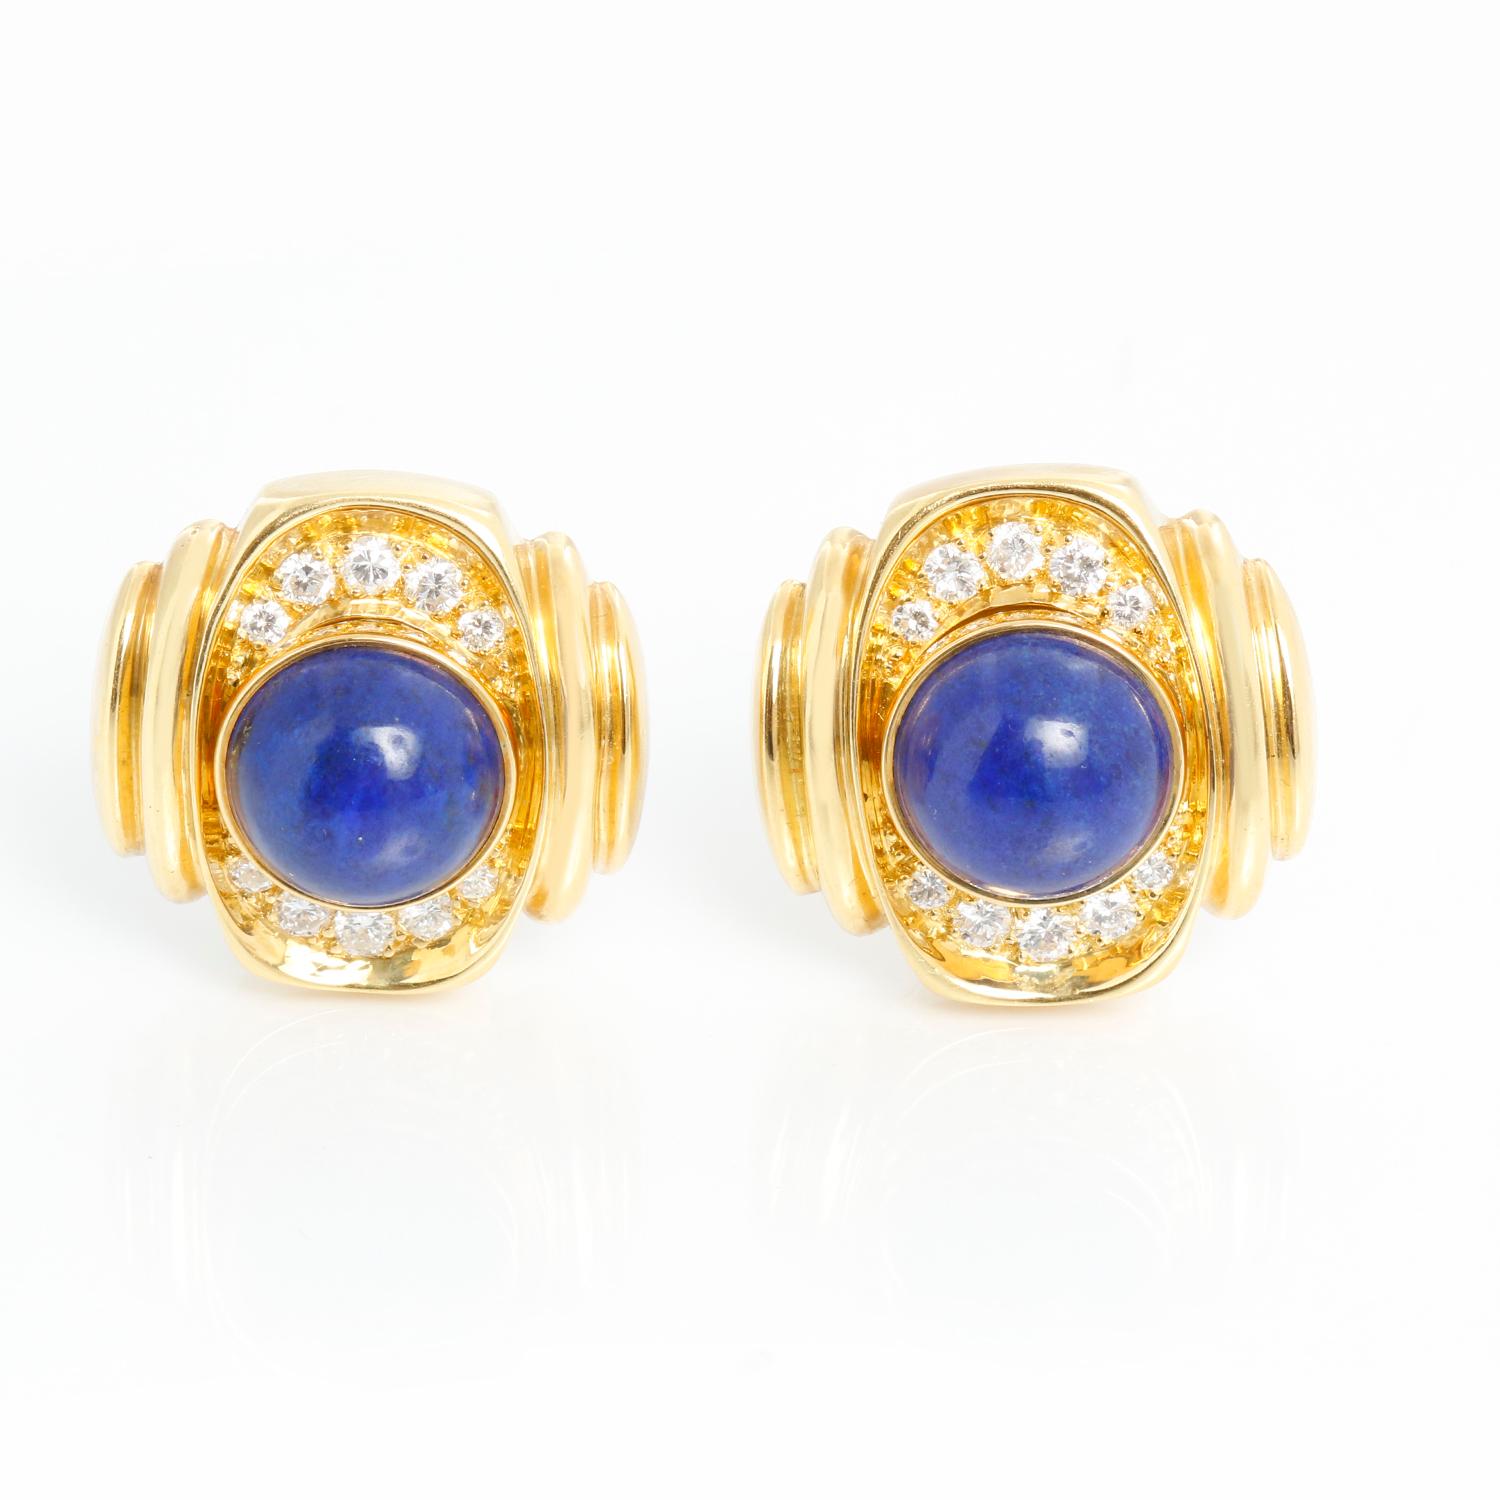 One pair of gold earrings each with 10 round brilliant cut diamonds with .42 ct weight. The earrings are 